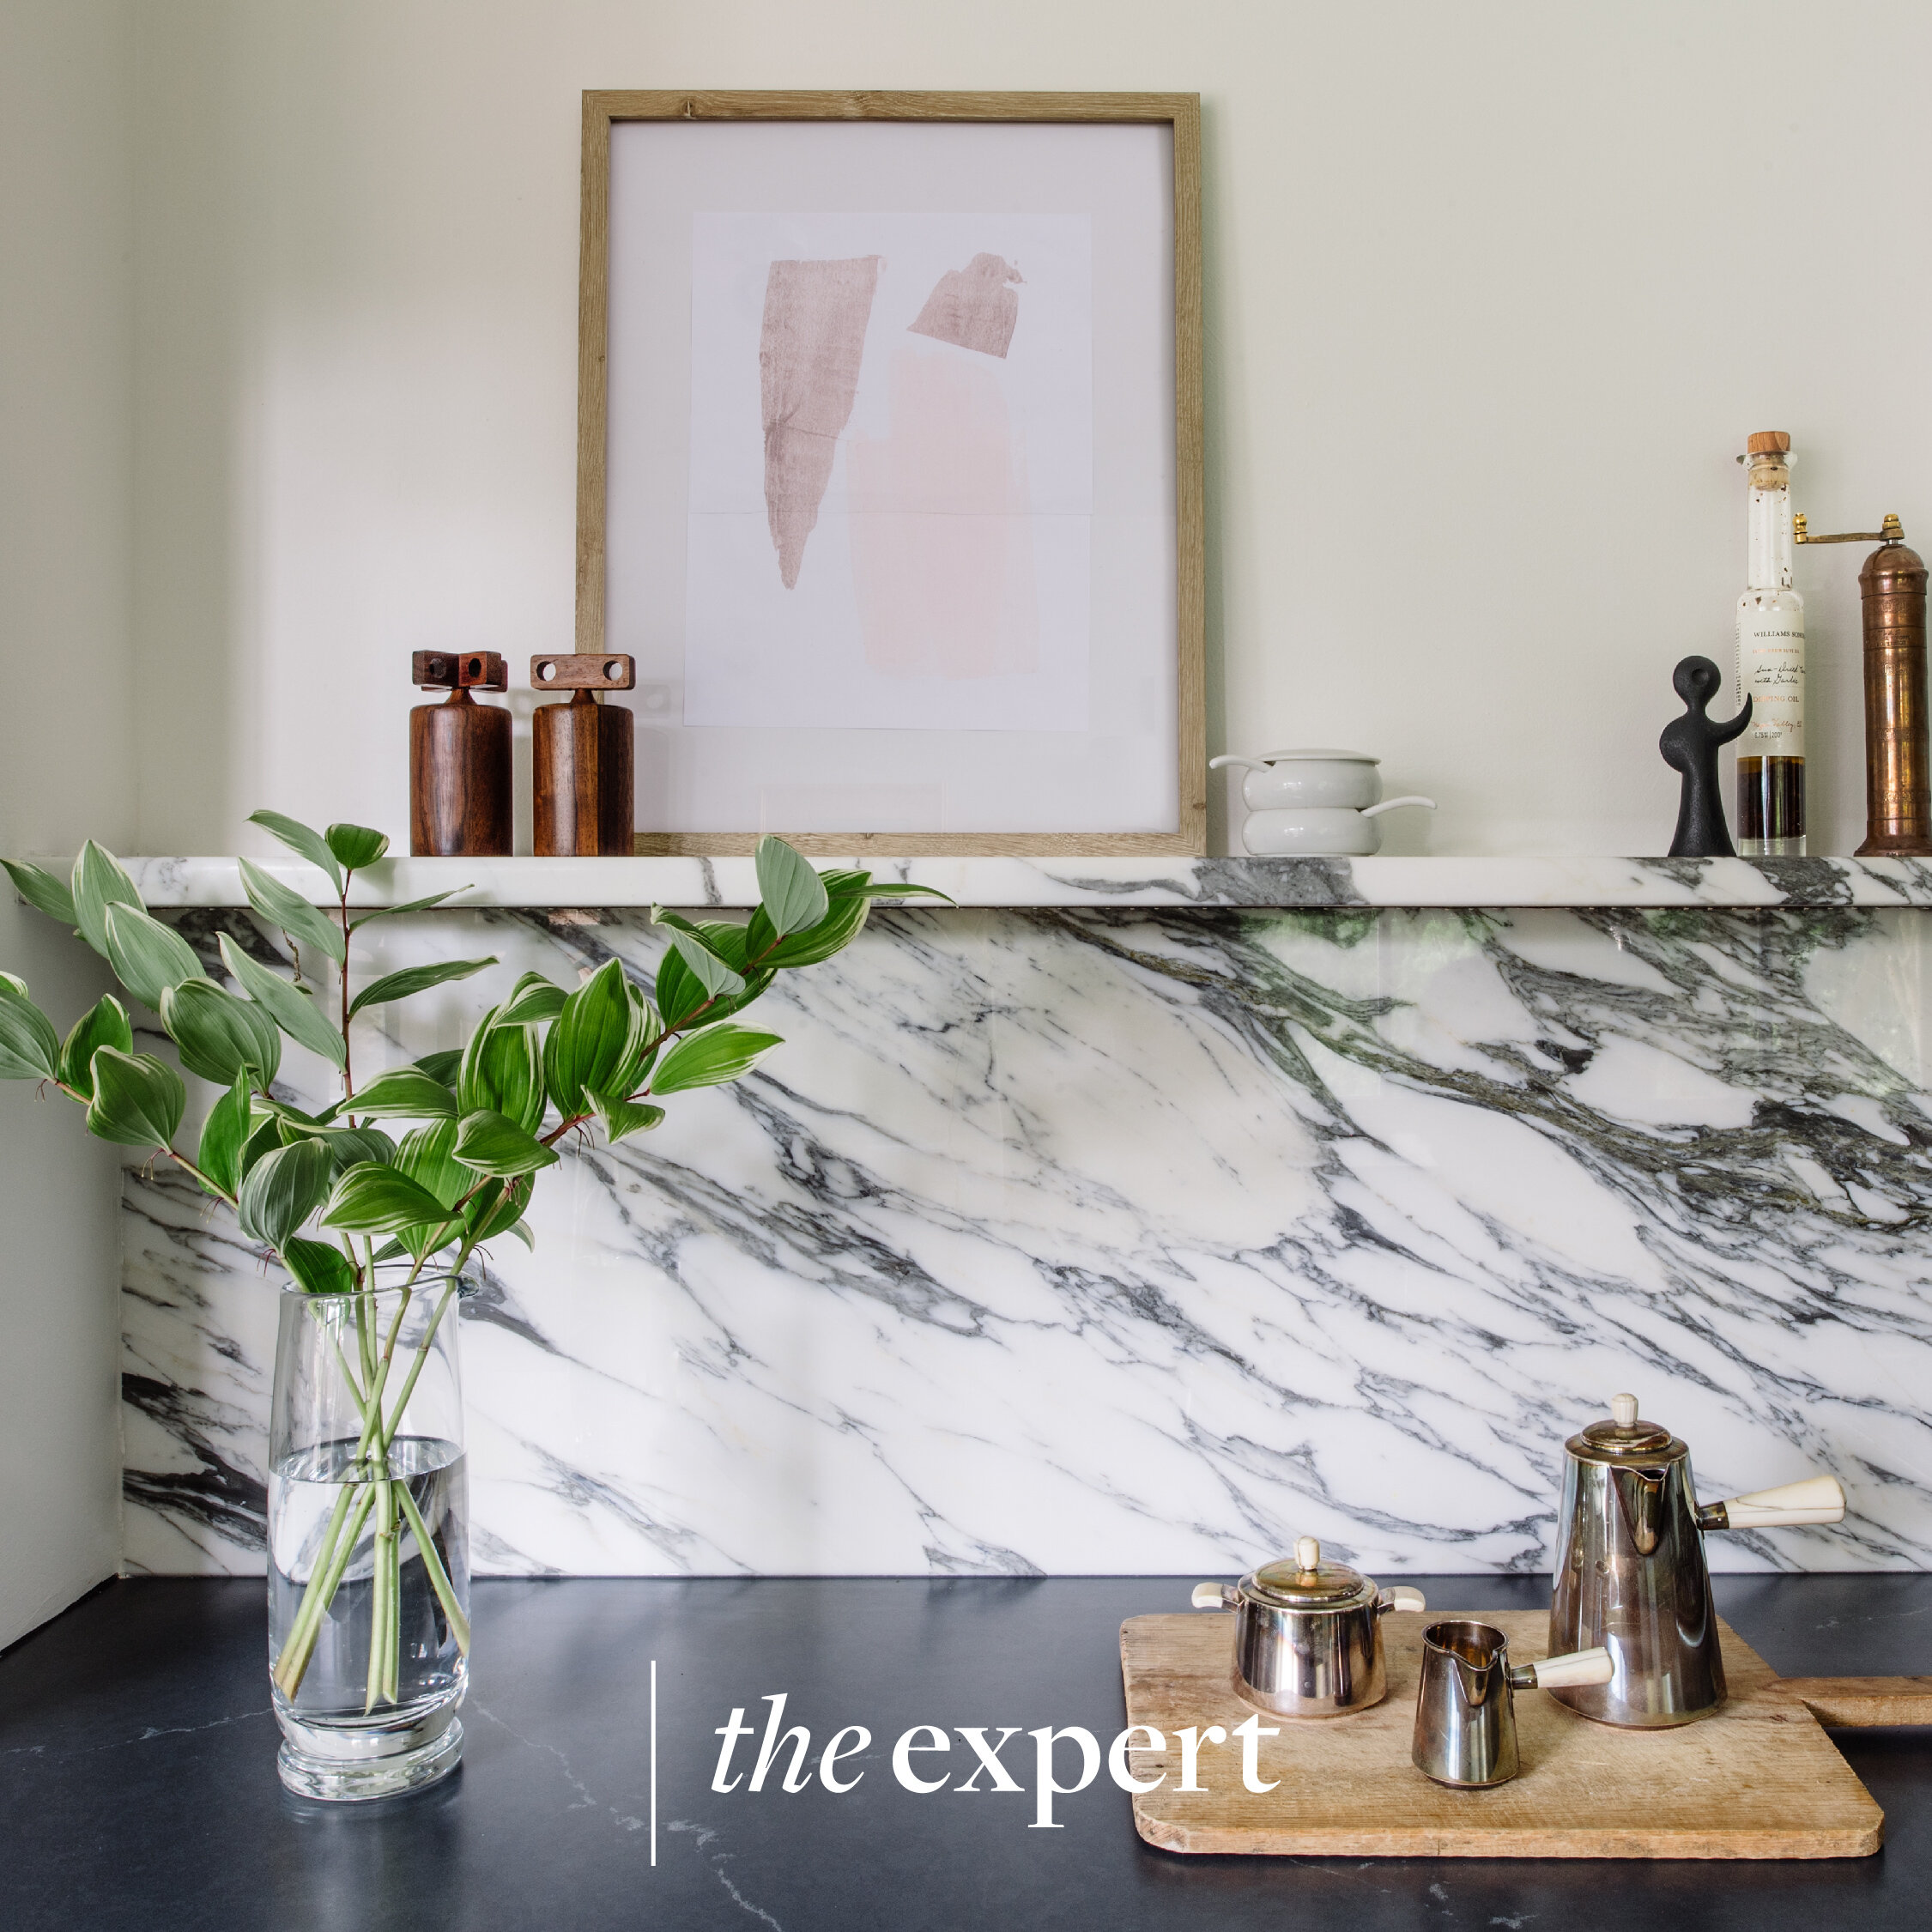 AGI is featured on The Expert | Alison Giese Interiors